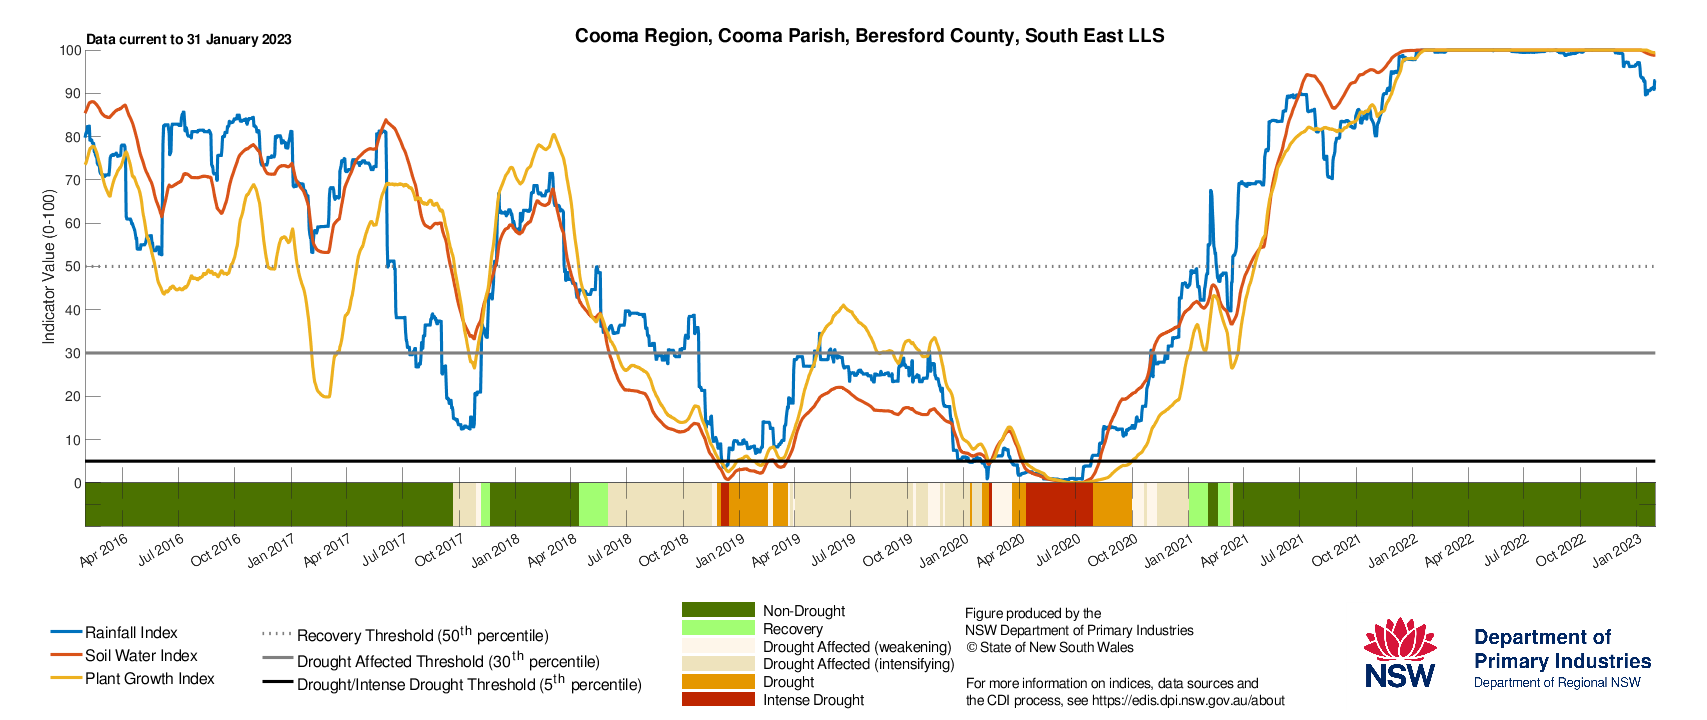 Figure 25. Drought History charts for Bega, Cooma and Goulburn in the South East LLS show the current and historical status of the three drought indicators: Rainfall Index, Soil Water Index, and Plant Growth Index